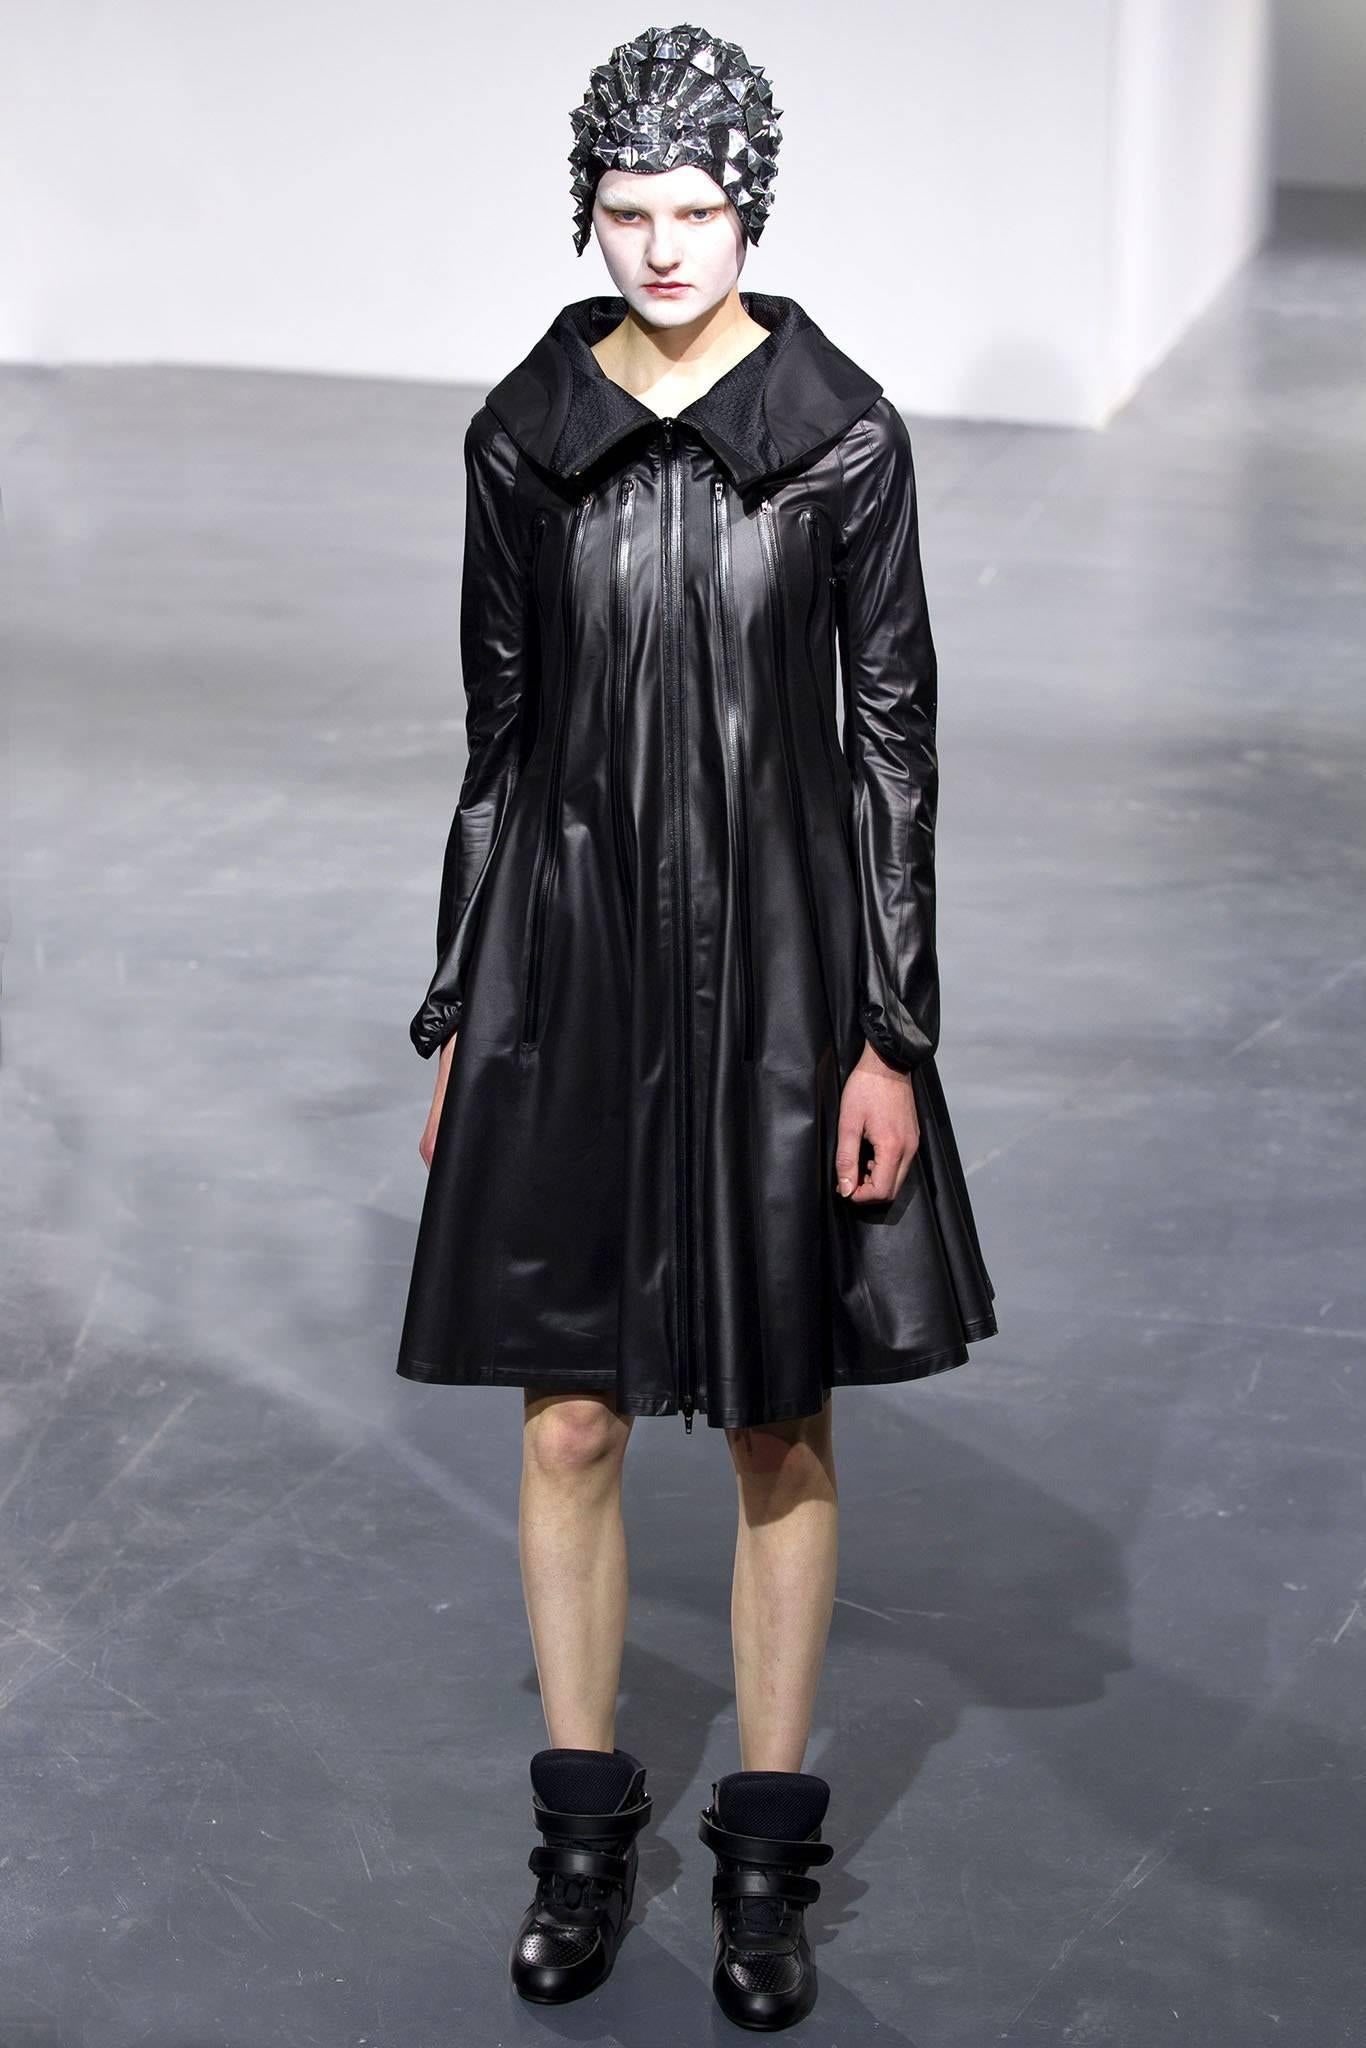 Junya Watanabe Comme des Garcons Spring 2013 Black Runway Nylon Zipper Coat.  Lined with sheer nylon mesh interior, stand up collar, zippers that can be worn undone to expose sheer mesh underneath. Tagged size USA M (best for USA 4 / 6).  To fit